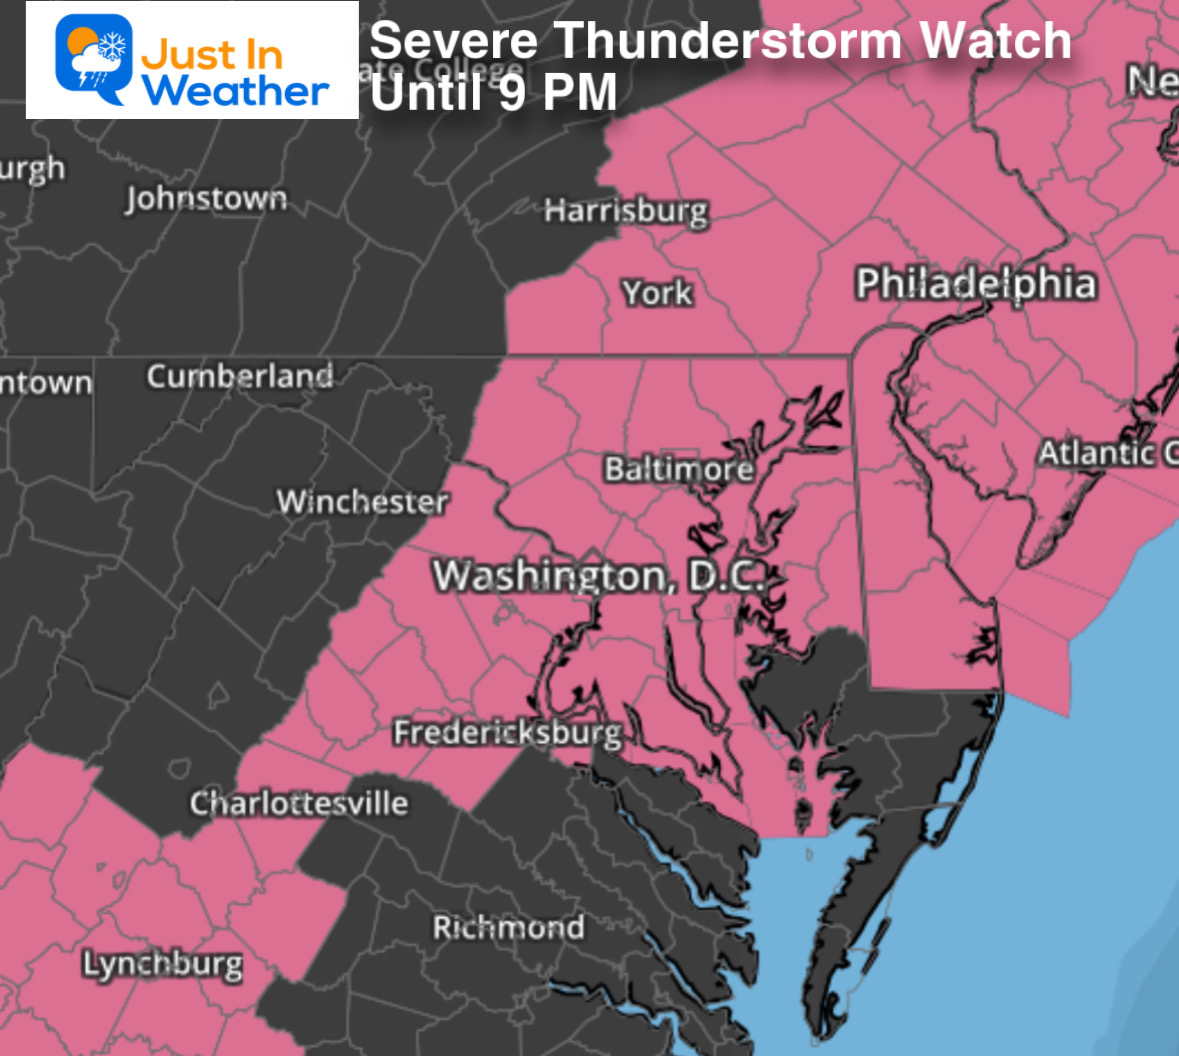 July 29 Severe Thunderstorm Watch